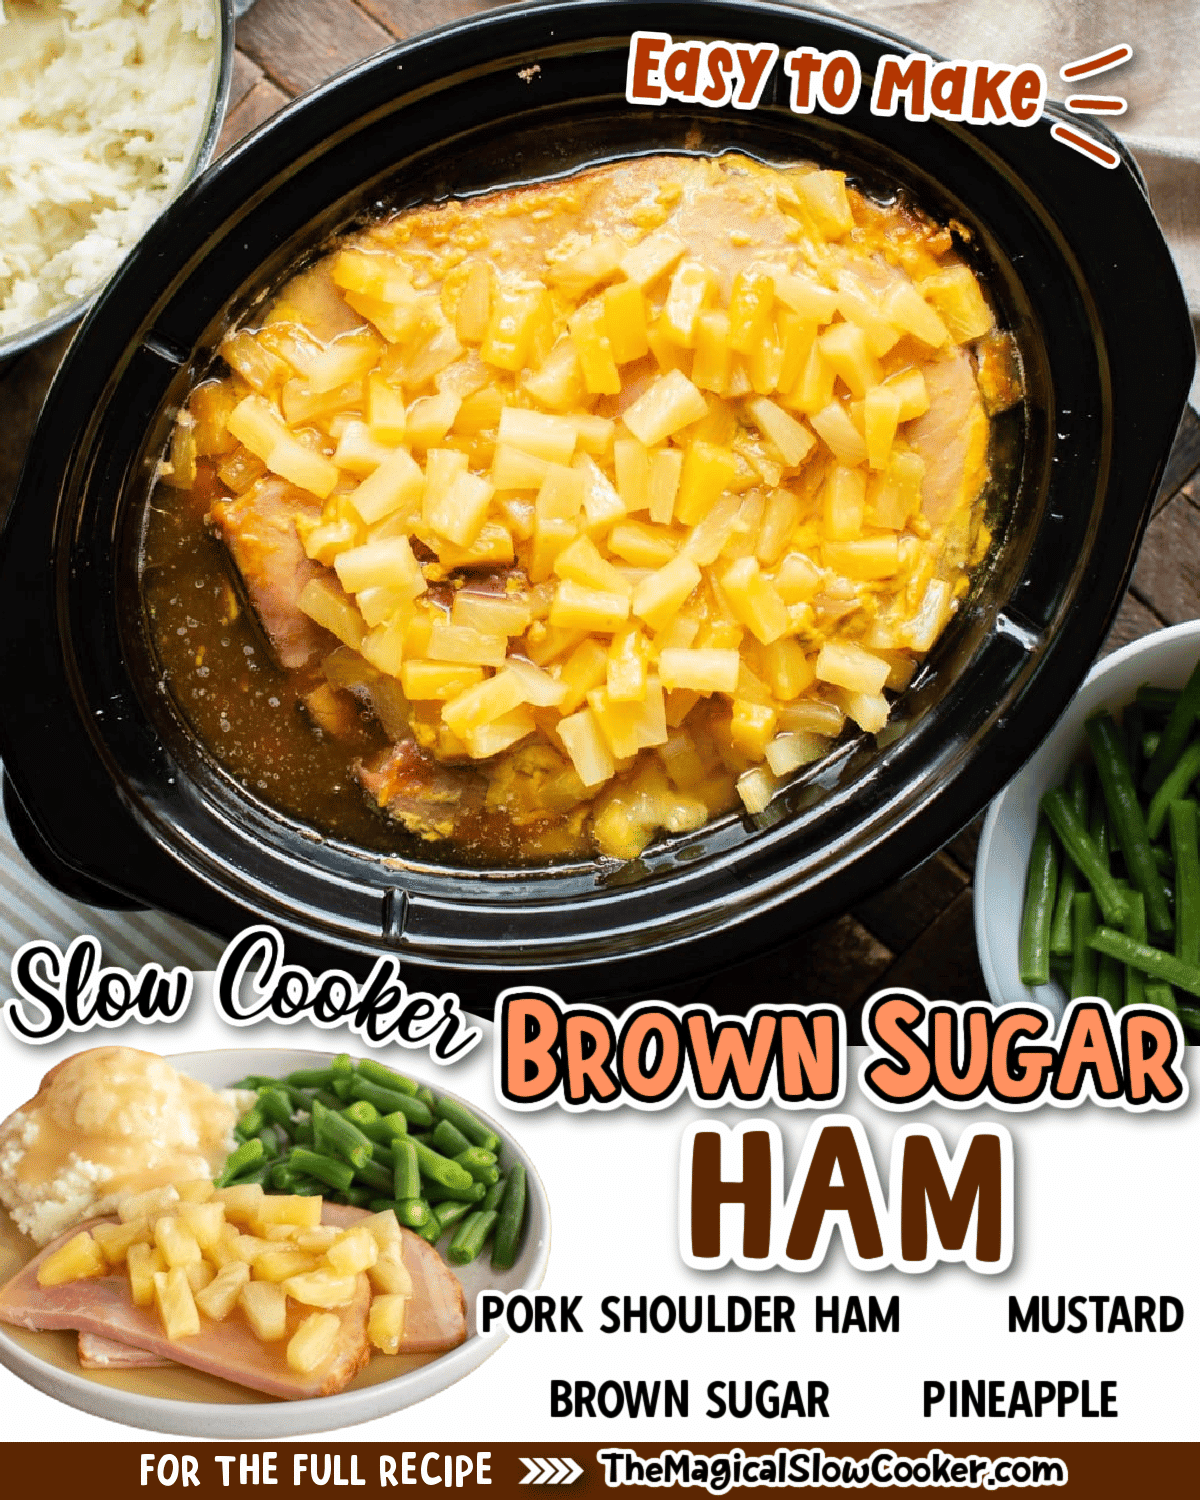 collage of brown sugar ham images with text of ingredients.